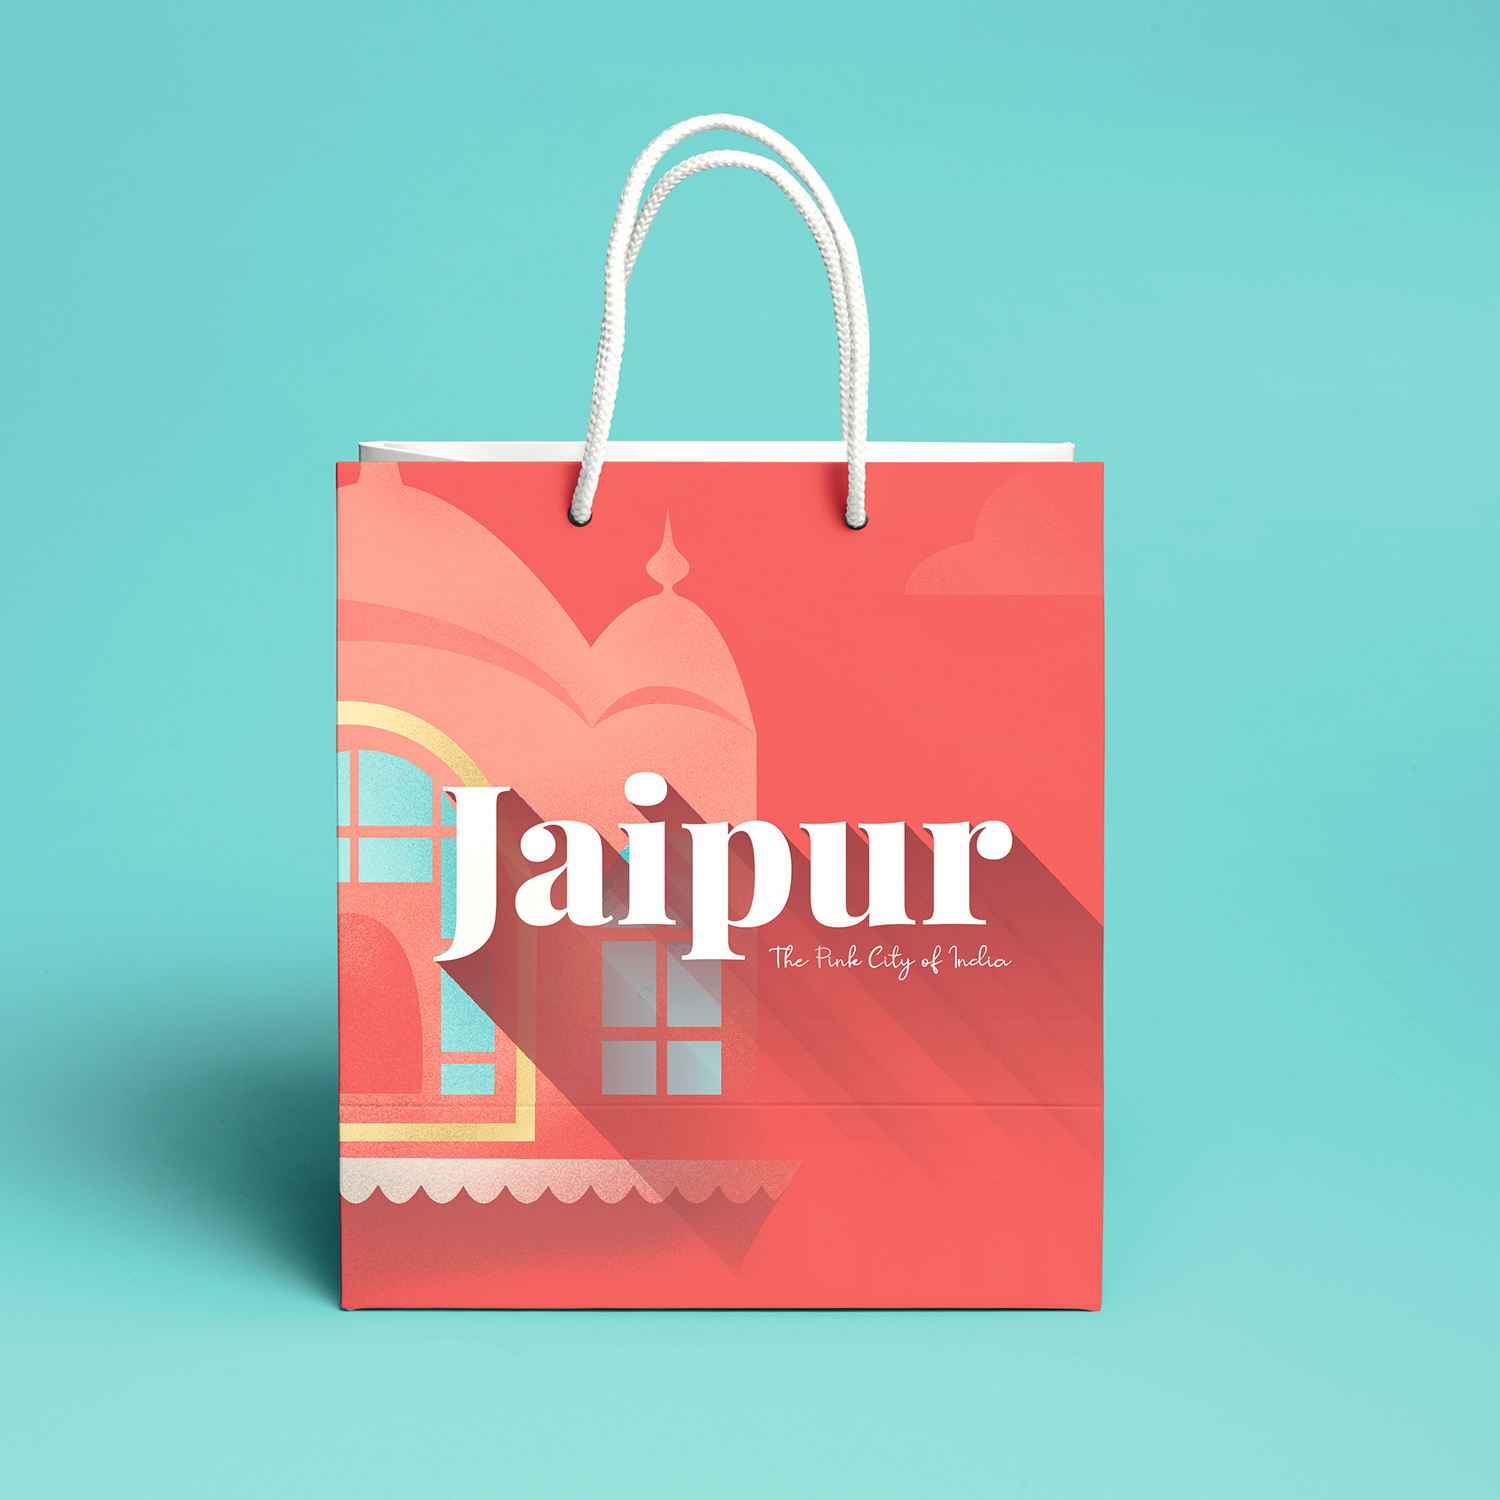 ‘Jaipur, the Pink City of India’ by Joyce Chan